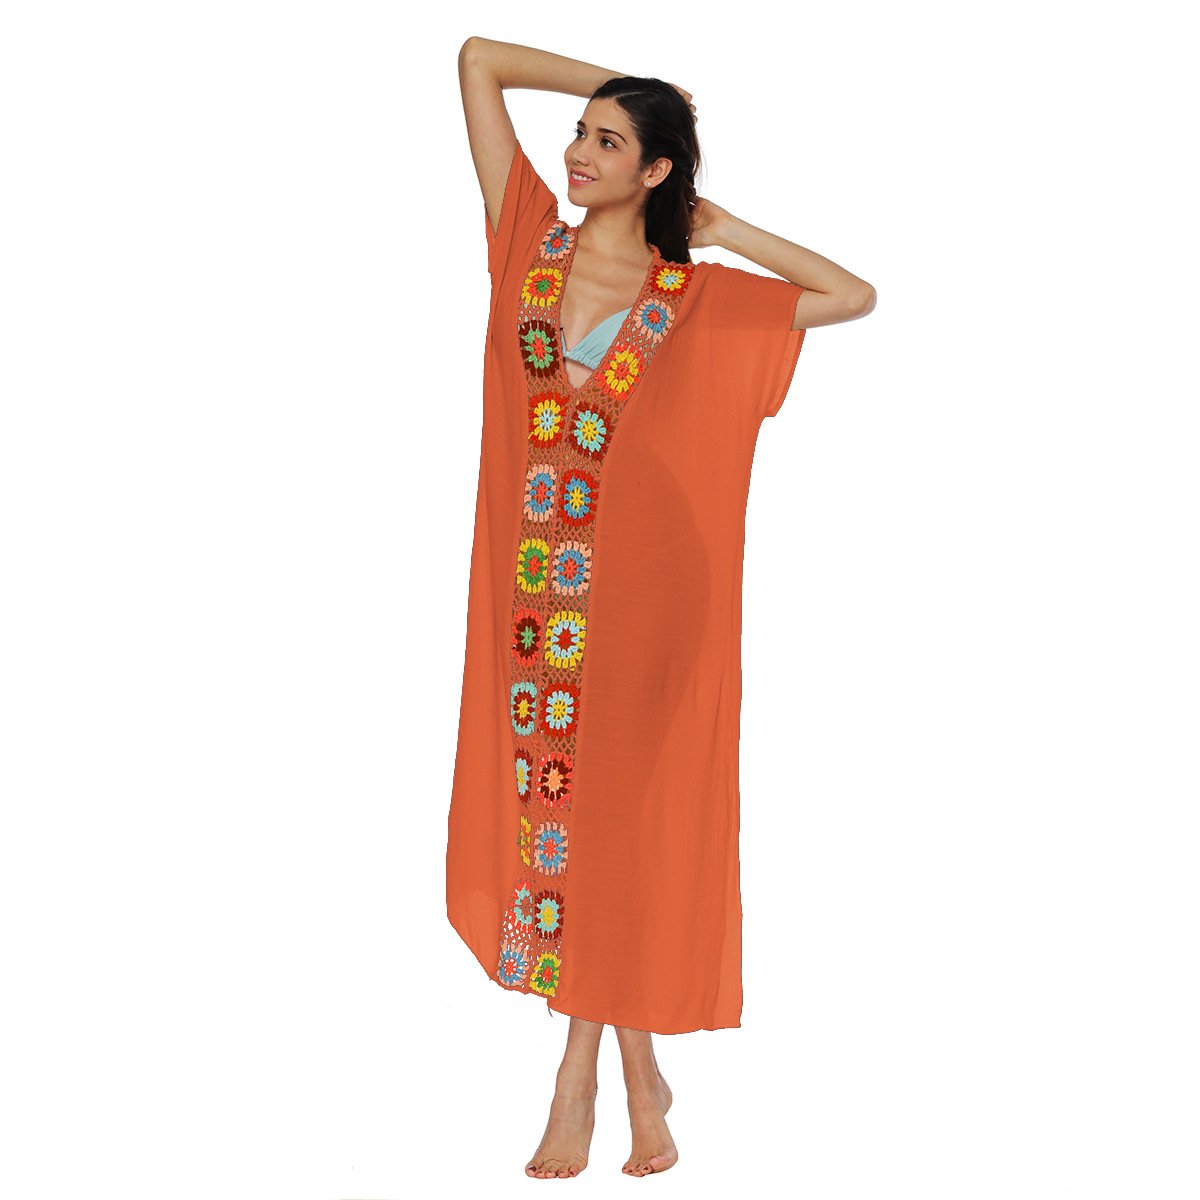 Women Long Summer Beach Cover Ups-Orange-One Size-Free Shipping at meselling99